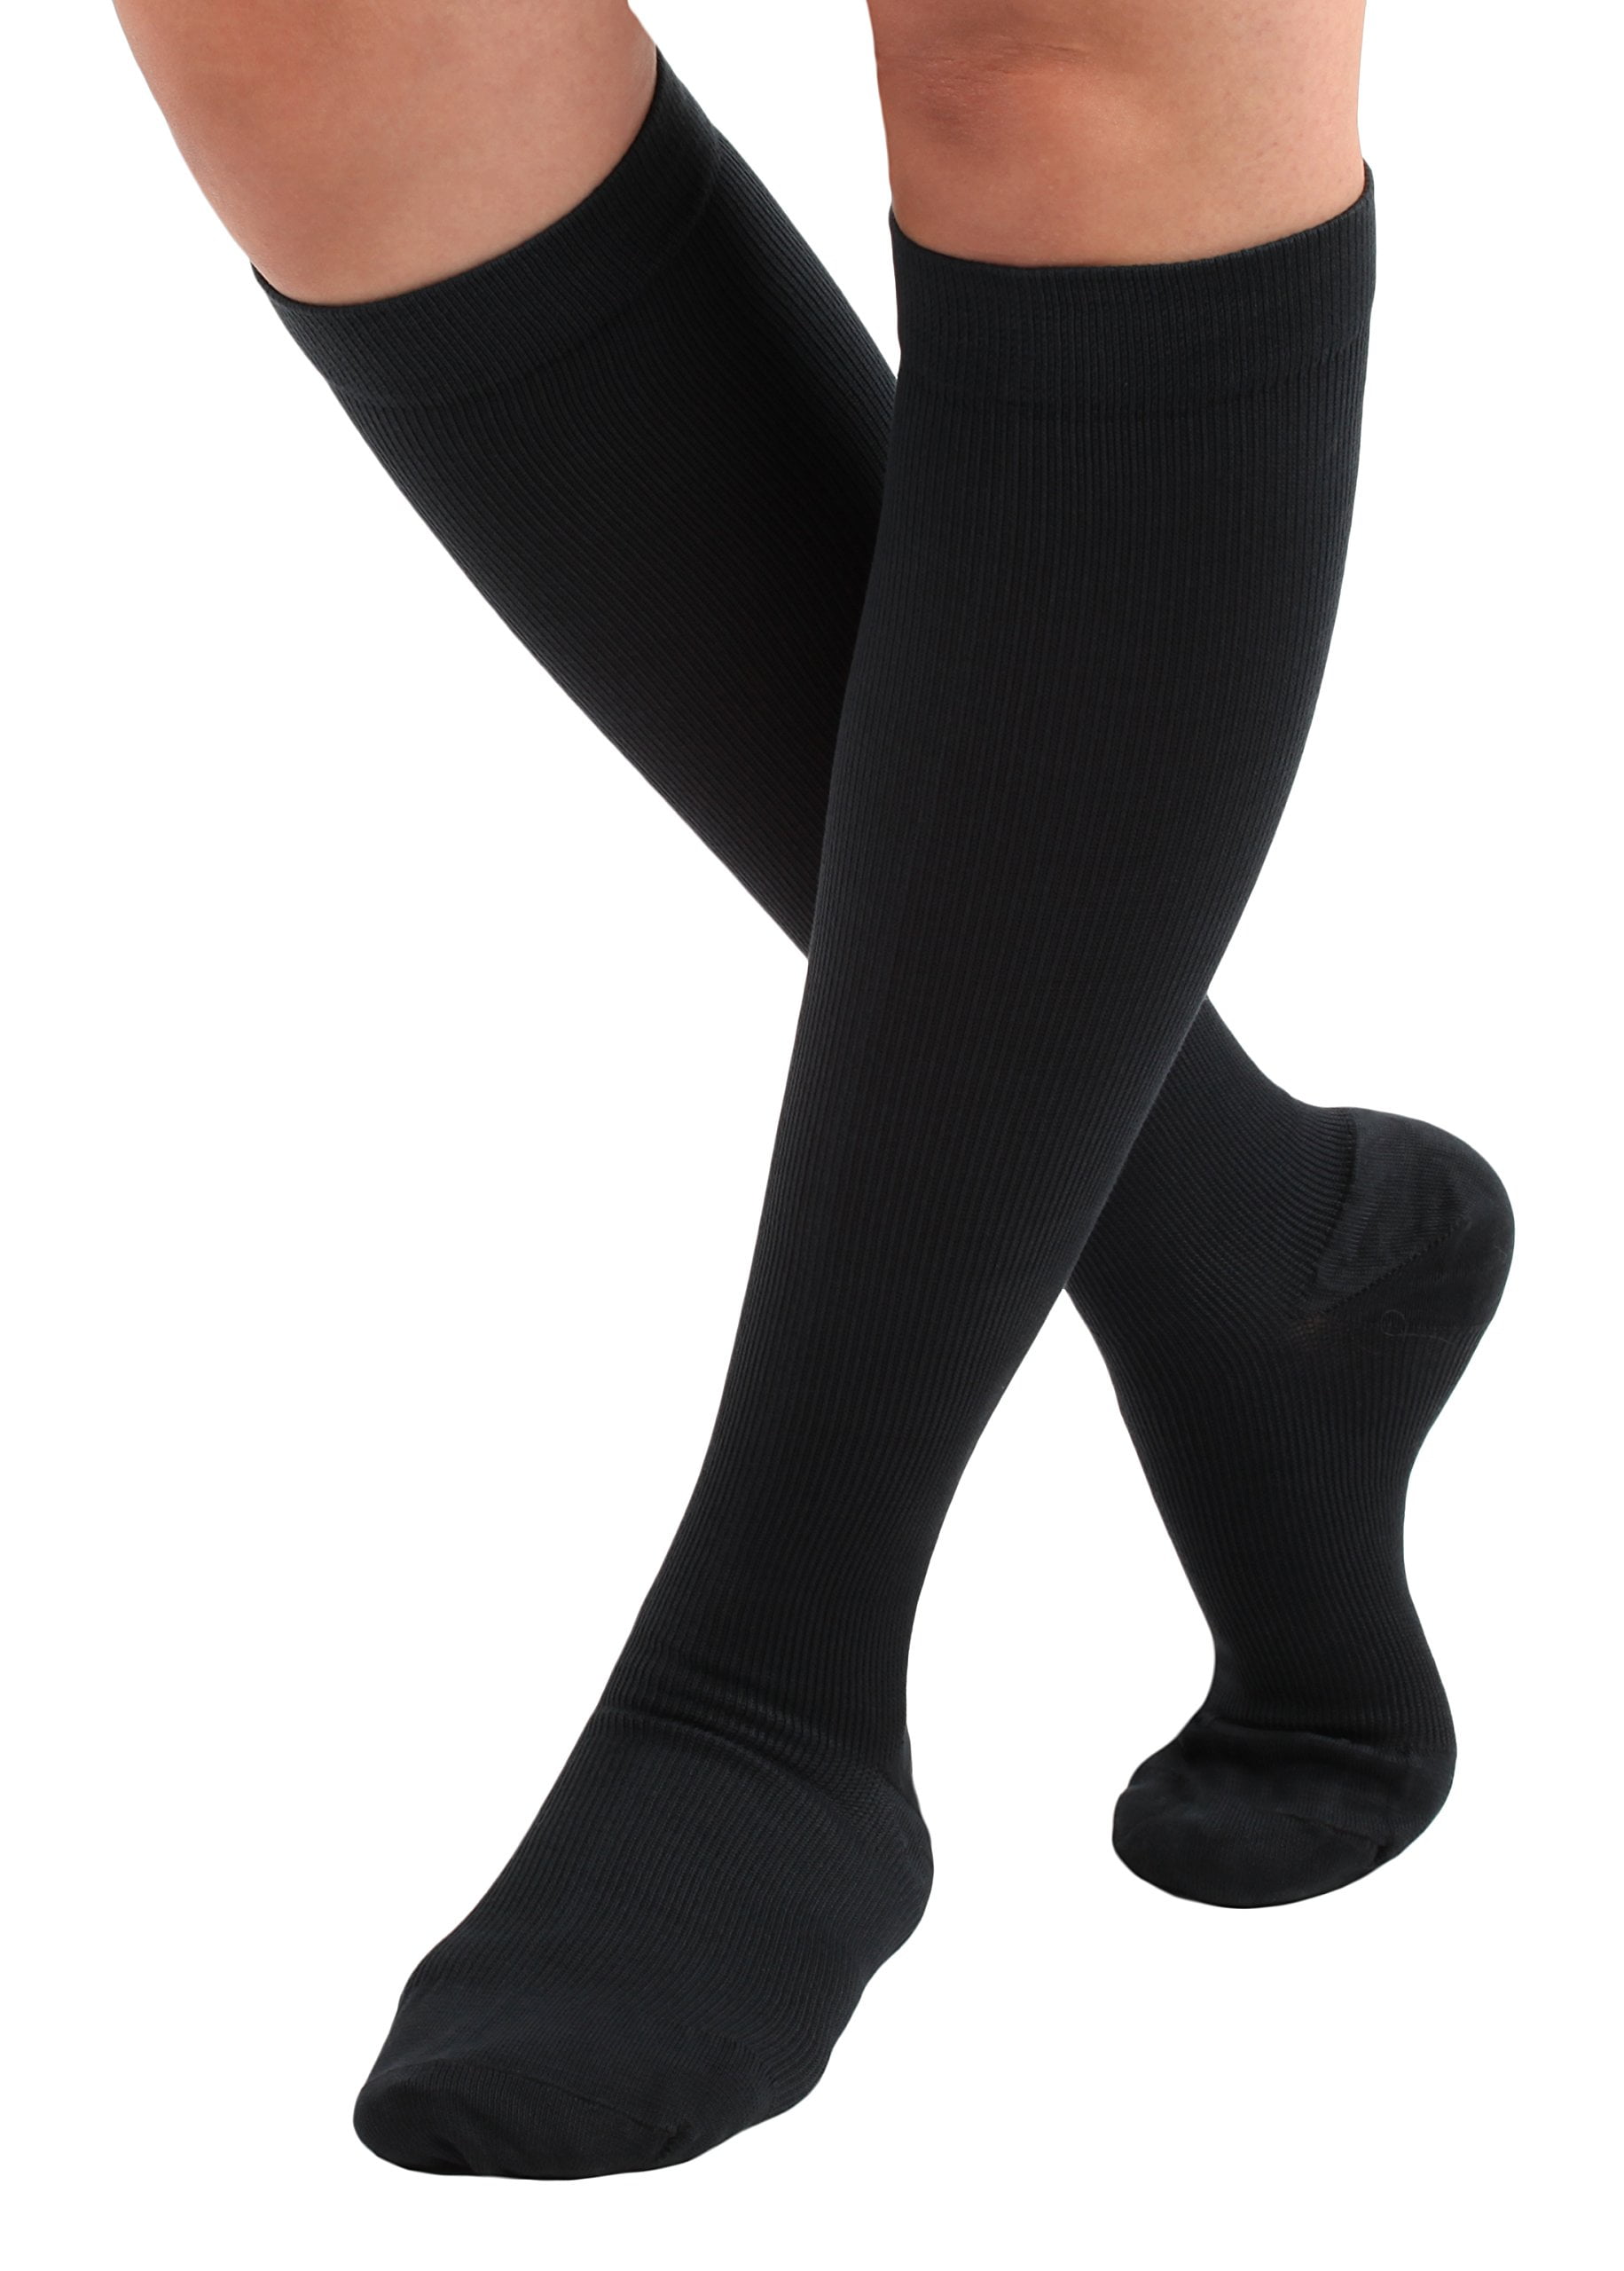 Cotton Compression Socks - Made in the USA - Firm Graduated Medical ...